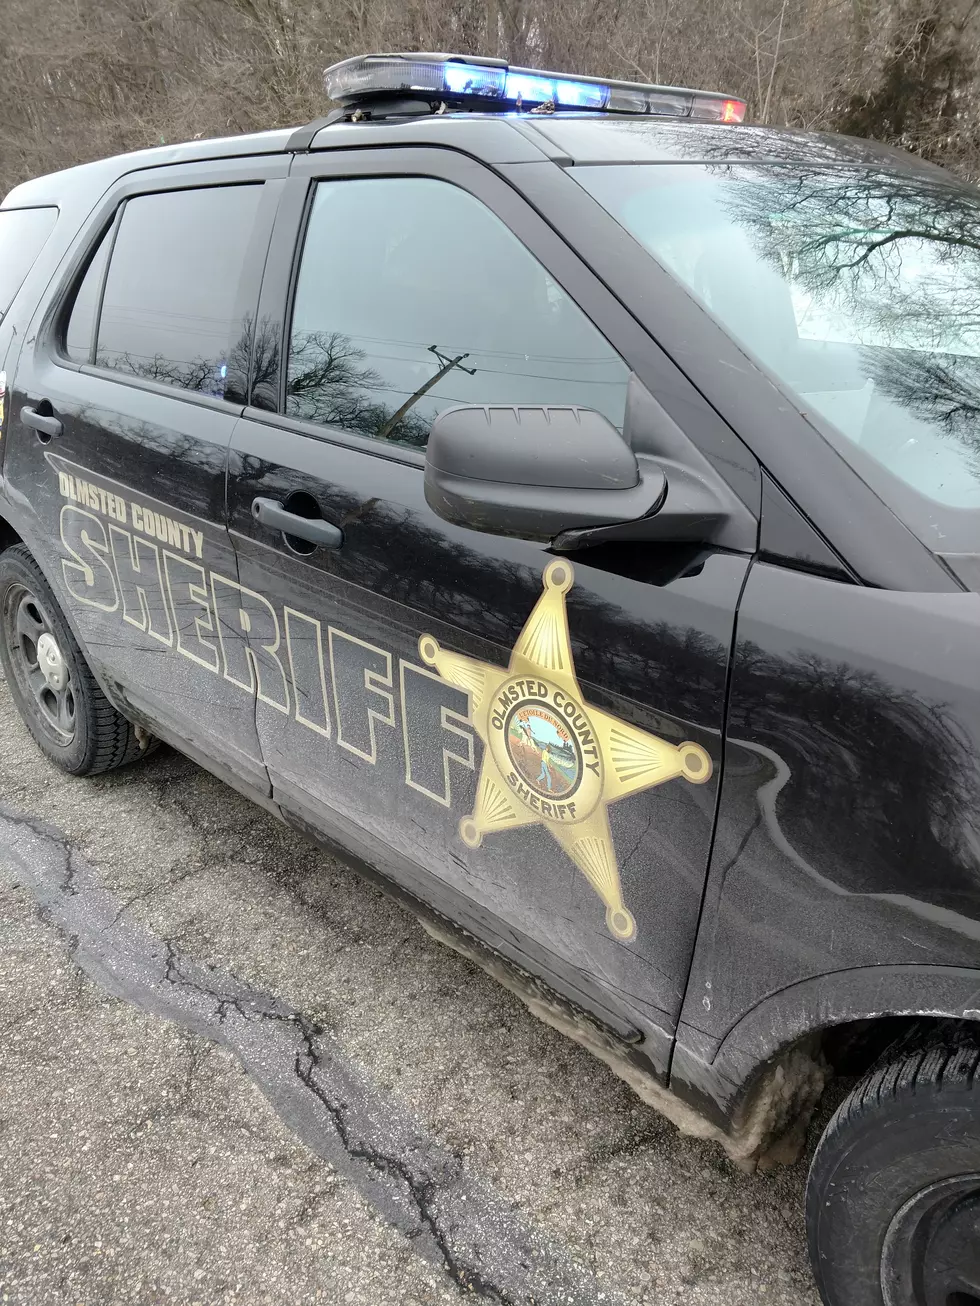 Florida Man Accused Of Fleeing Deputy on Busy Rochester Road